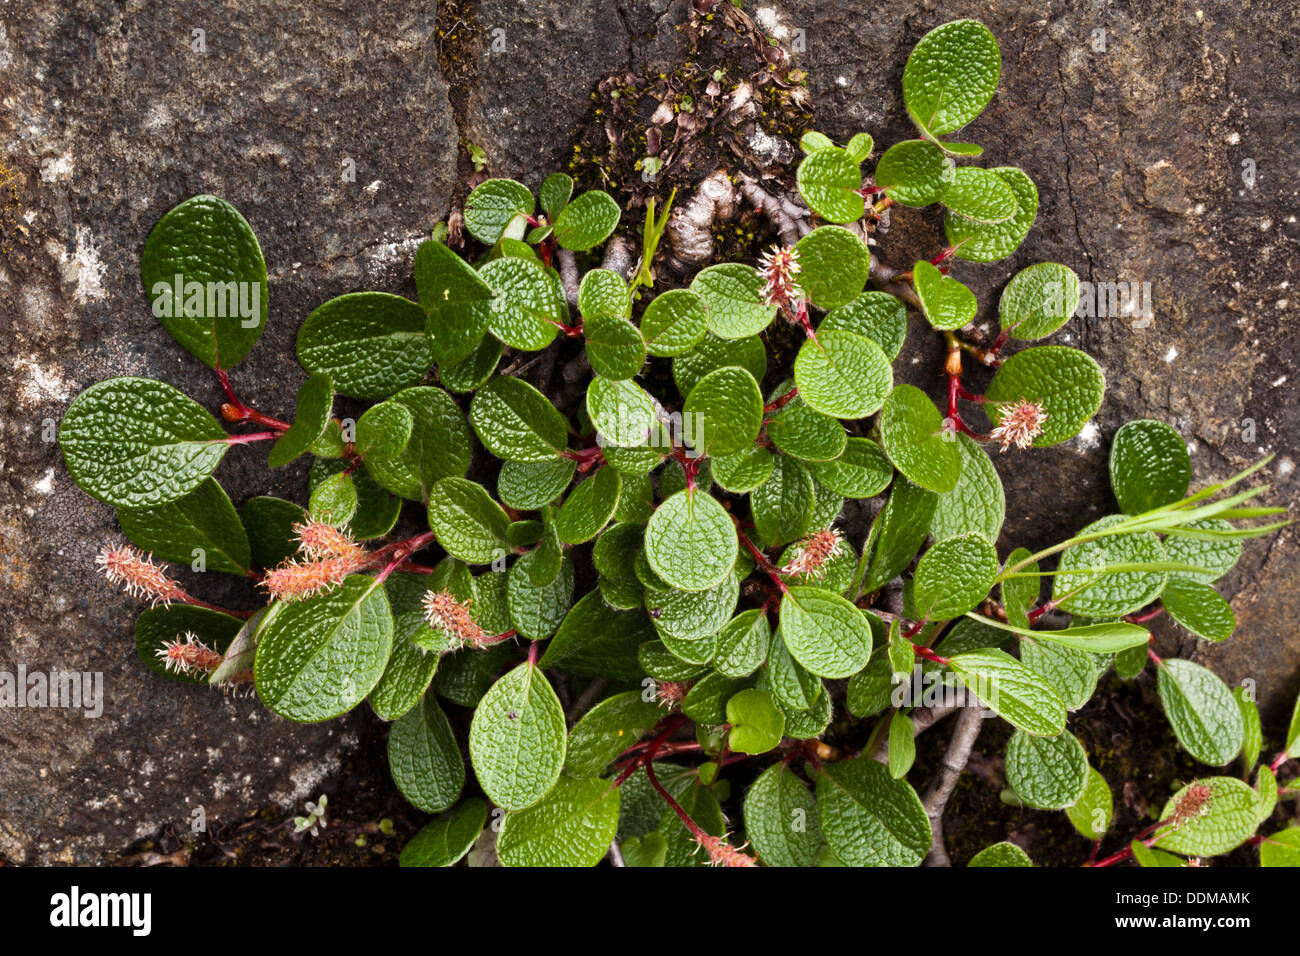 Net-leaved willow (Salix reticulata) leaves and flowers Stock Photo